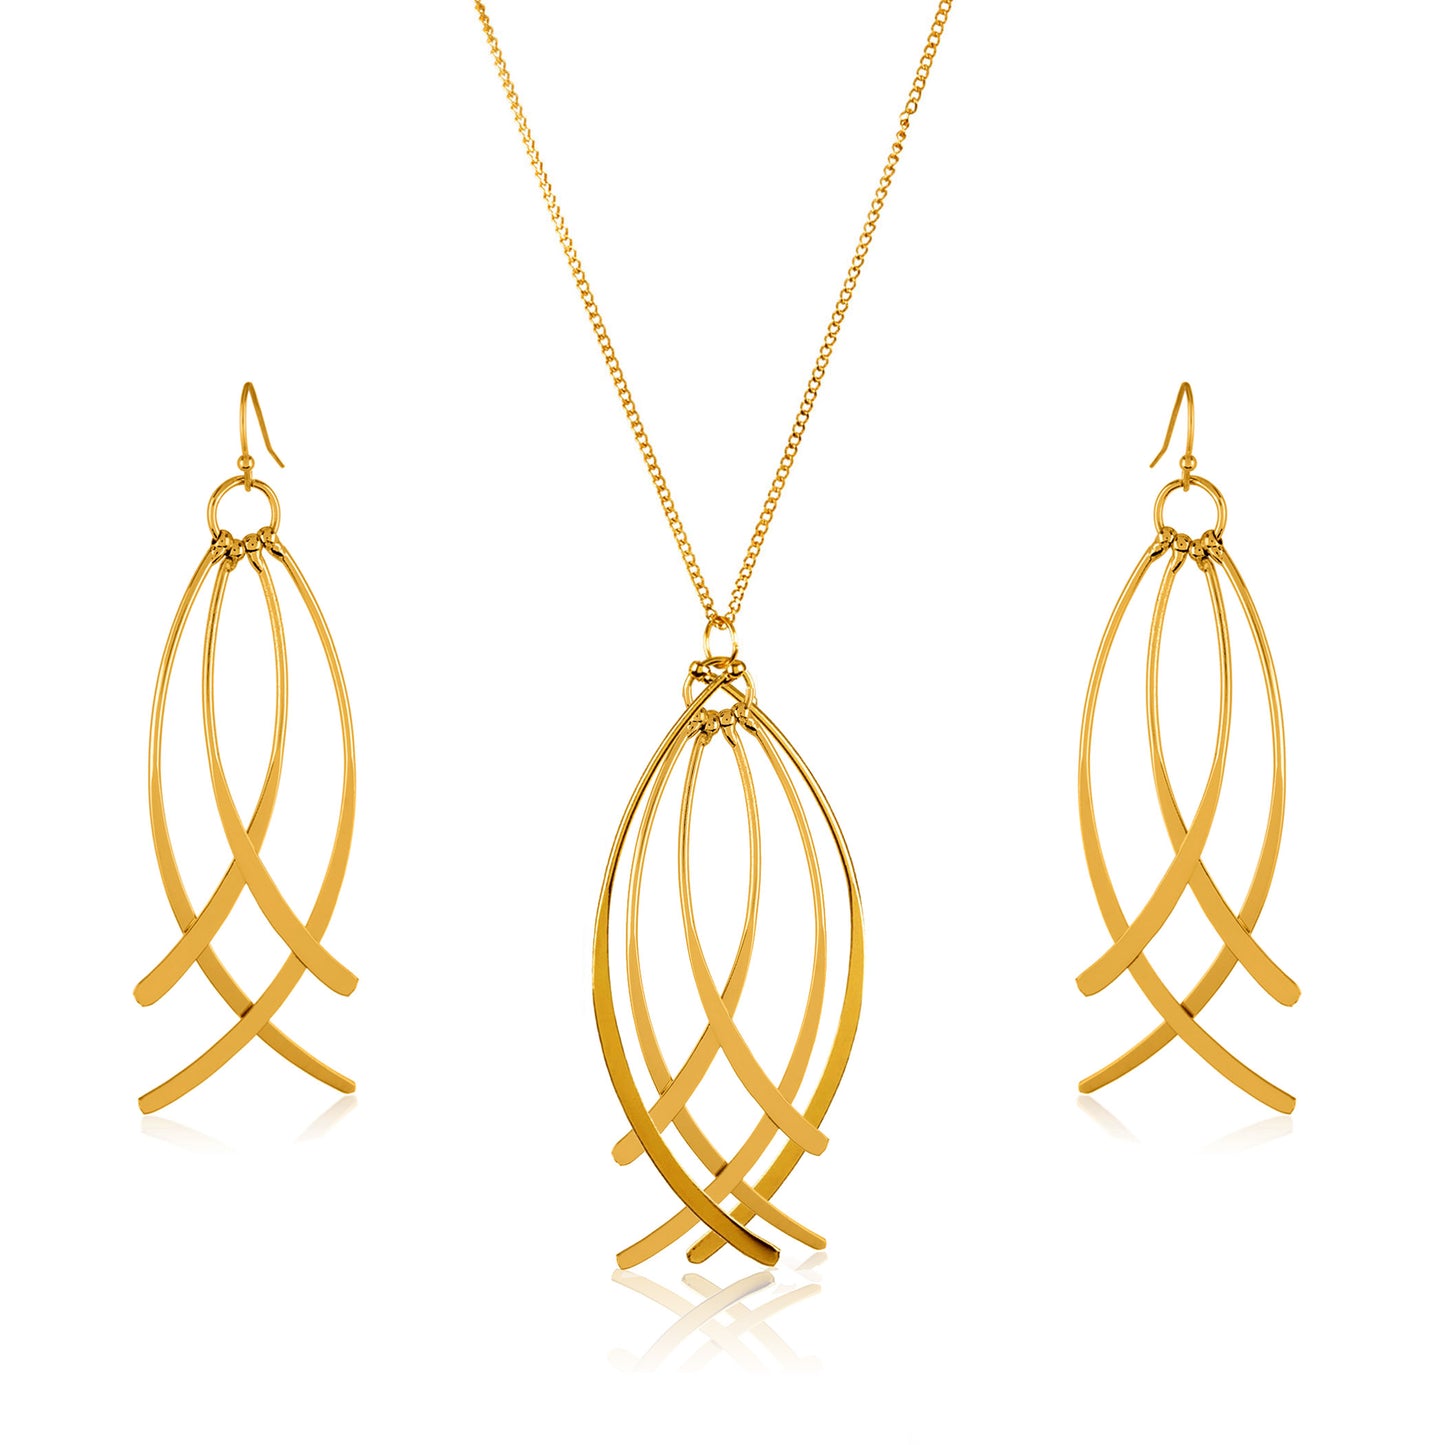 ELYA Women's Gold Tone Curved Wire Dangle Necklace and Earrings Jewelry Set